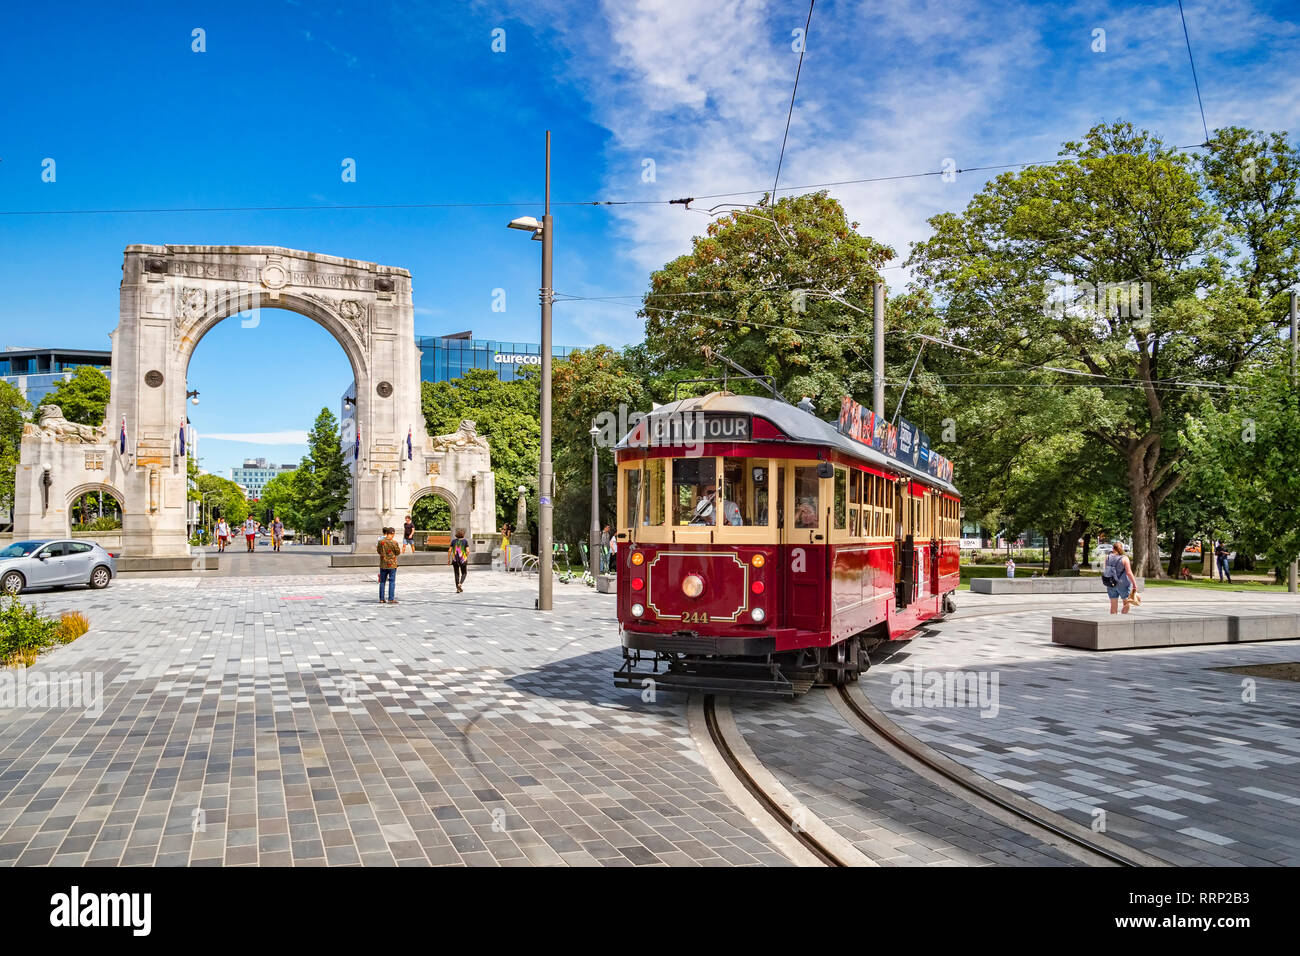 3 January 2019: Christchurch, New Zealand - A vintage tram turns into Cashel Street near the Bridge of Remembrance in the centre of Christchurch. Stock Photo